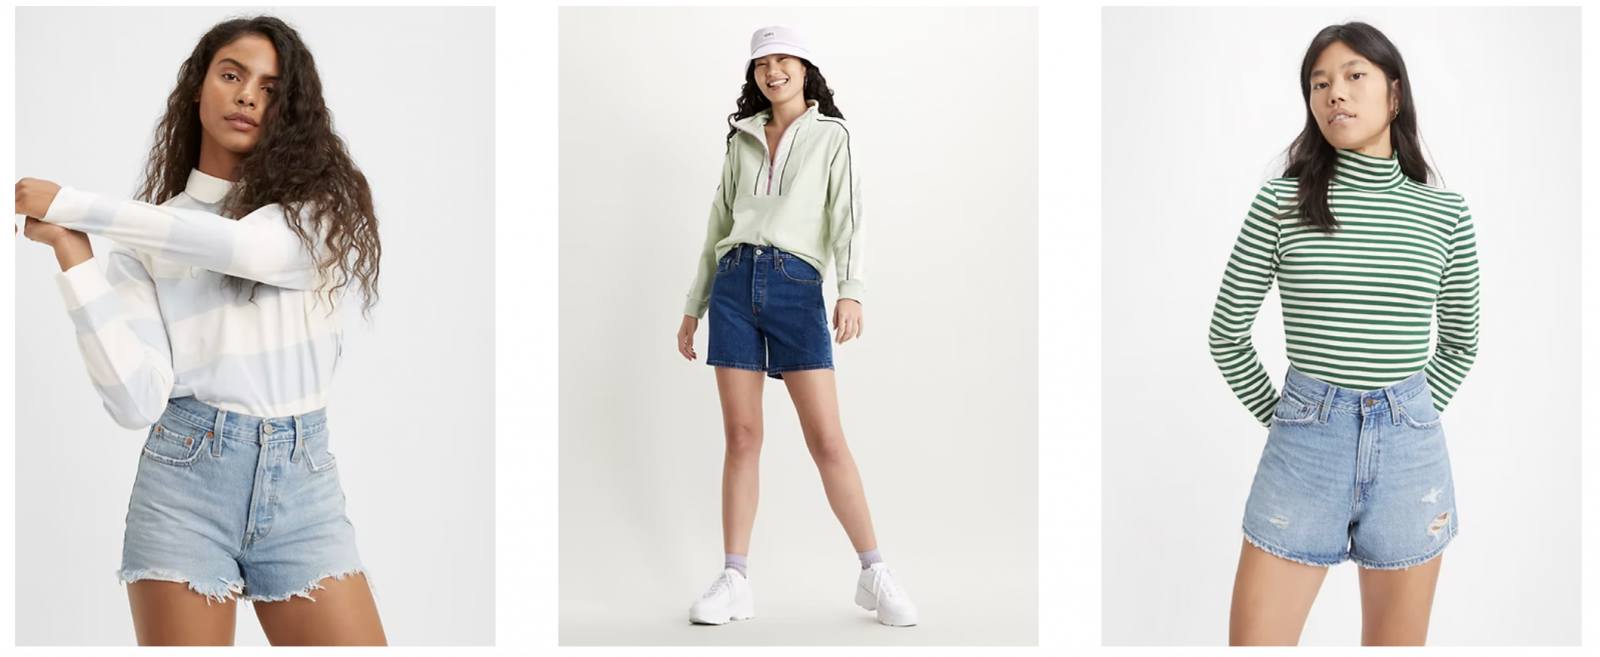 Save on denim shorts with Levi's coupon codes